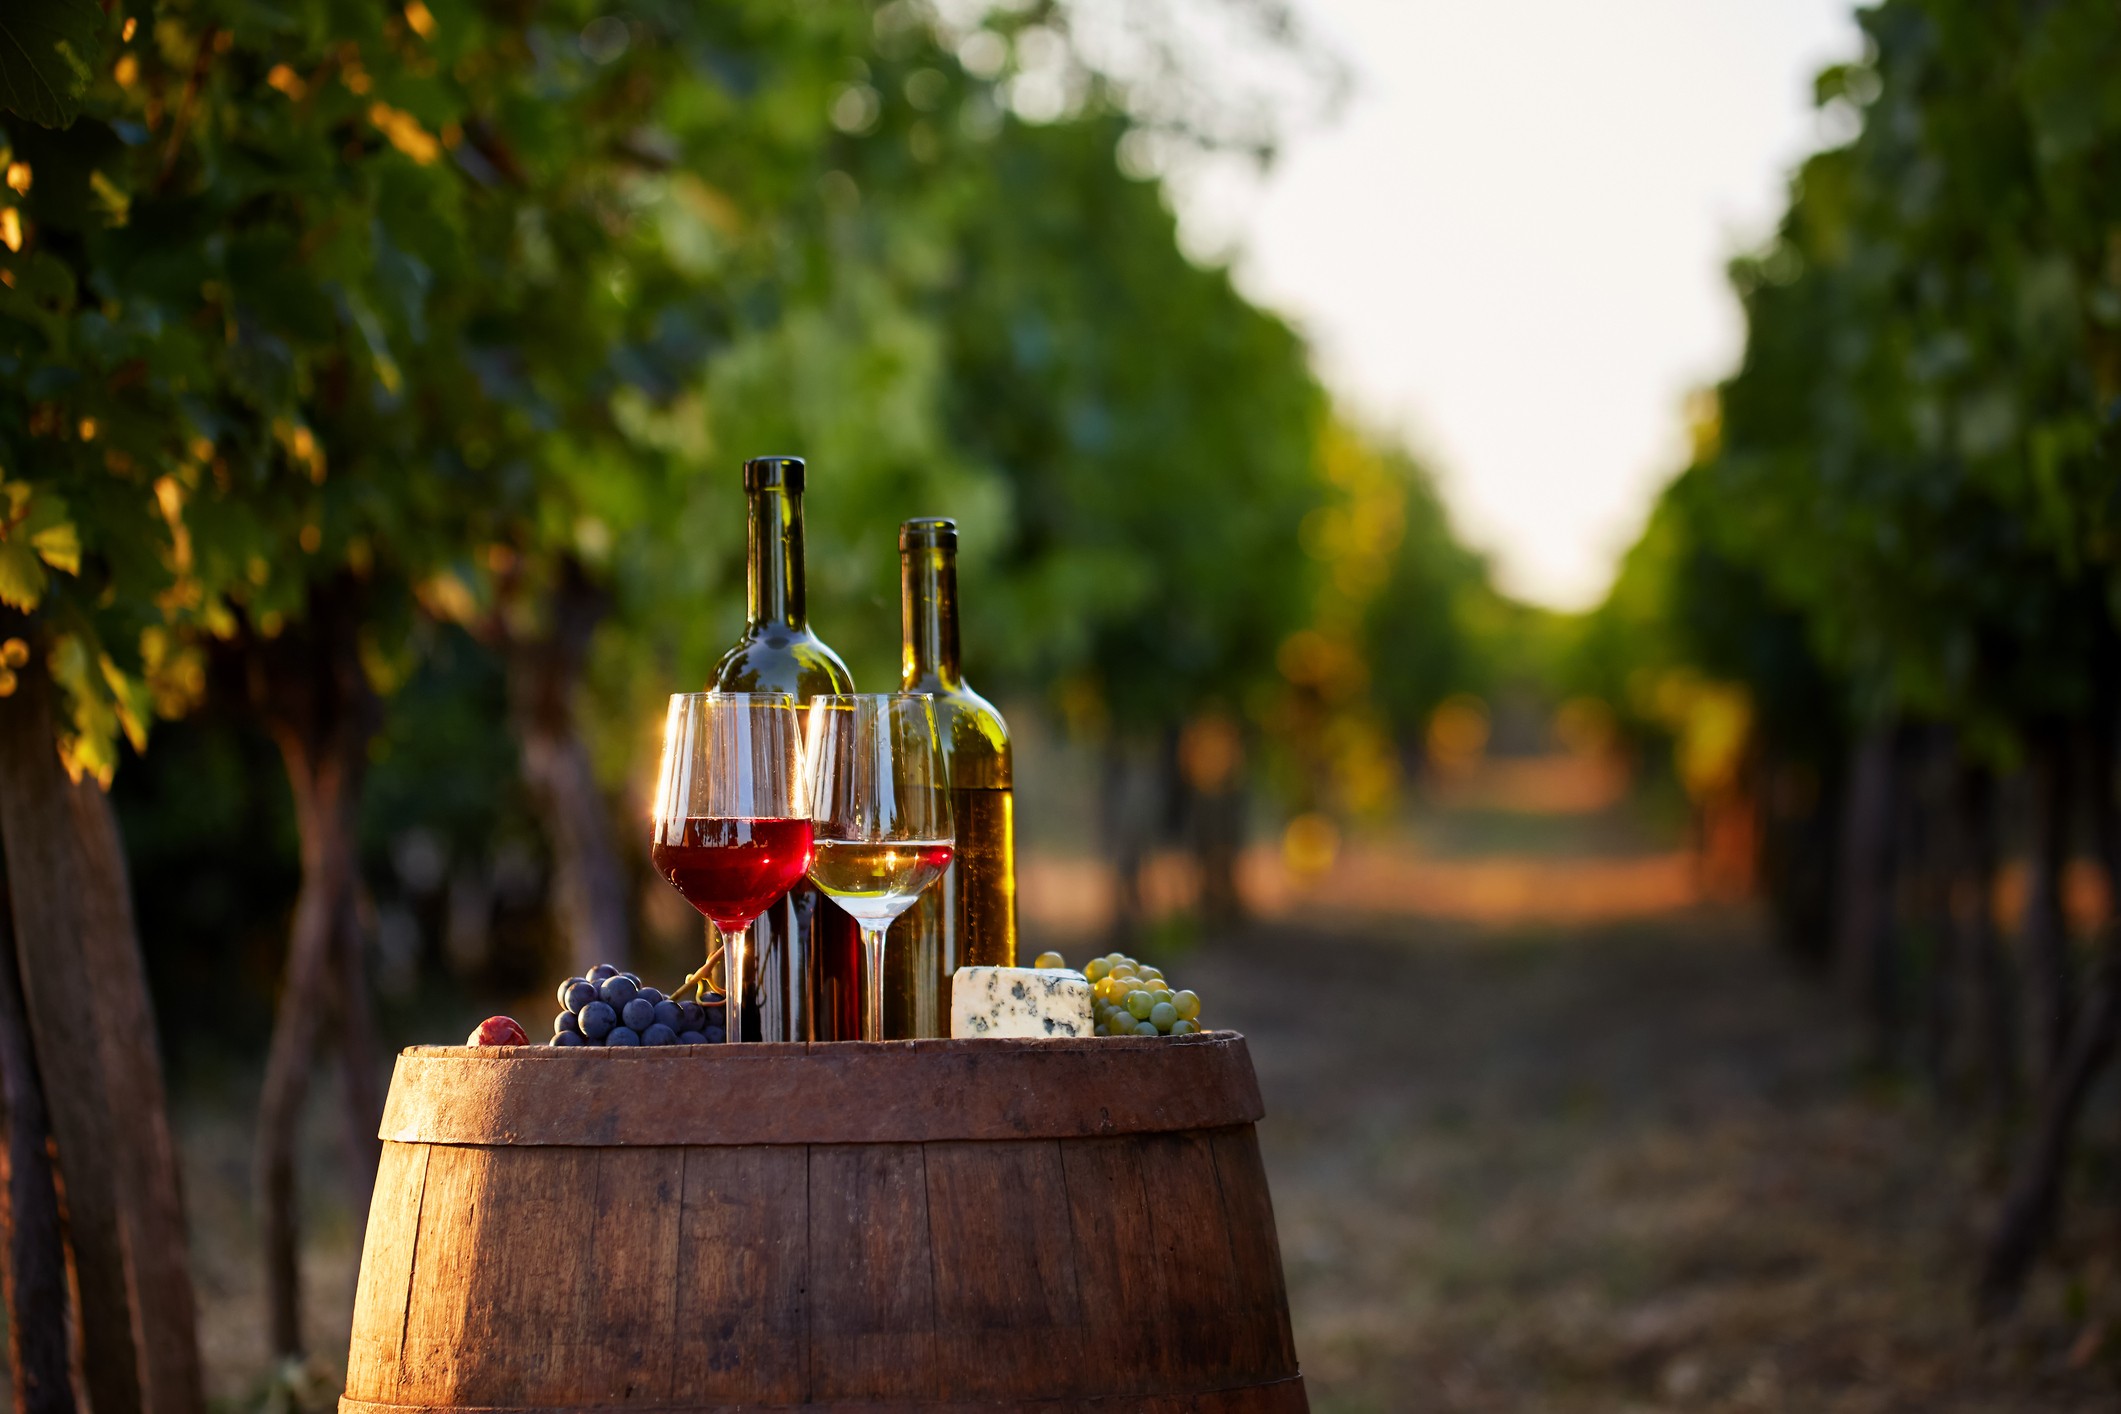 Organic and biodynamic wines offer connoisseurs high-quality products made under stringent agricultural codes.